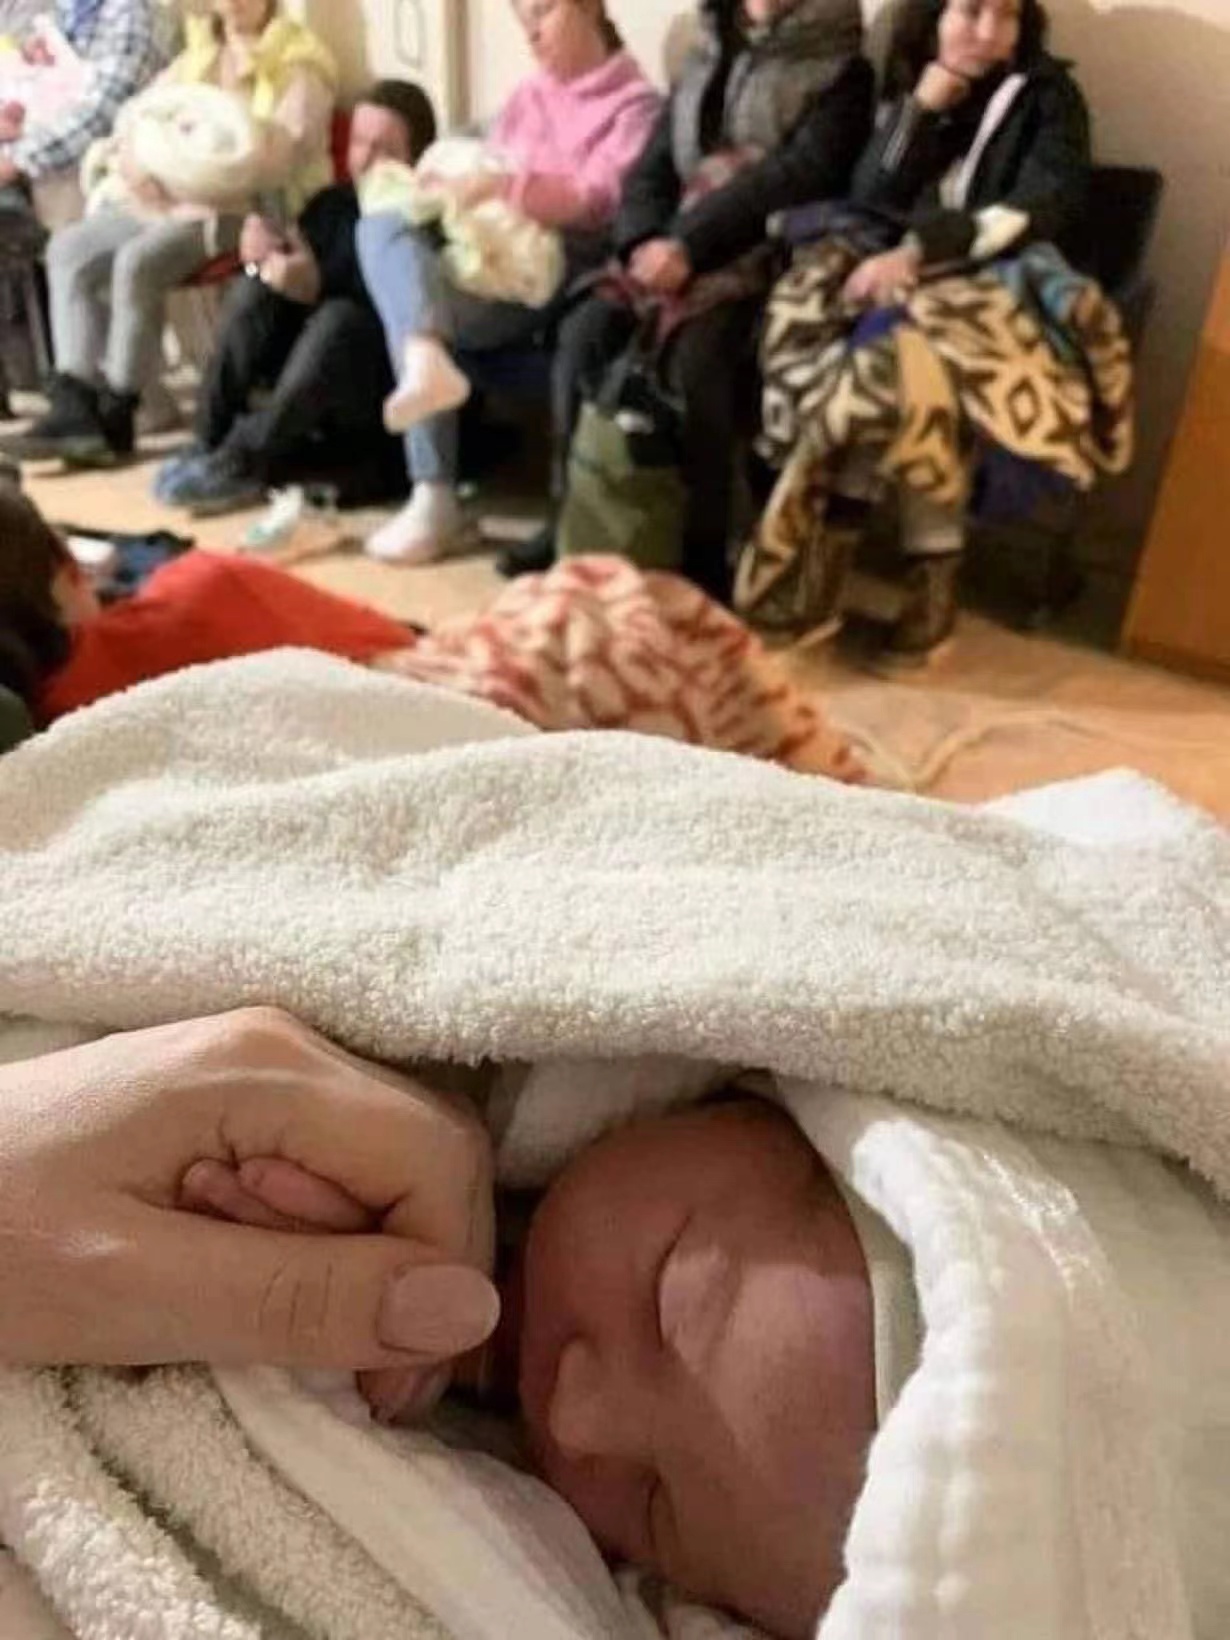 A picture posted on social media of a baby sleeping in a subway station in Kyiv, Ukraine, reminded me of the Chongqing Hot Pot bomb shelters that we fled to when Japanese bombers flew overhead